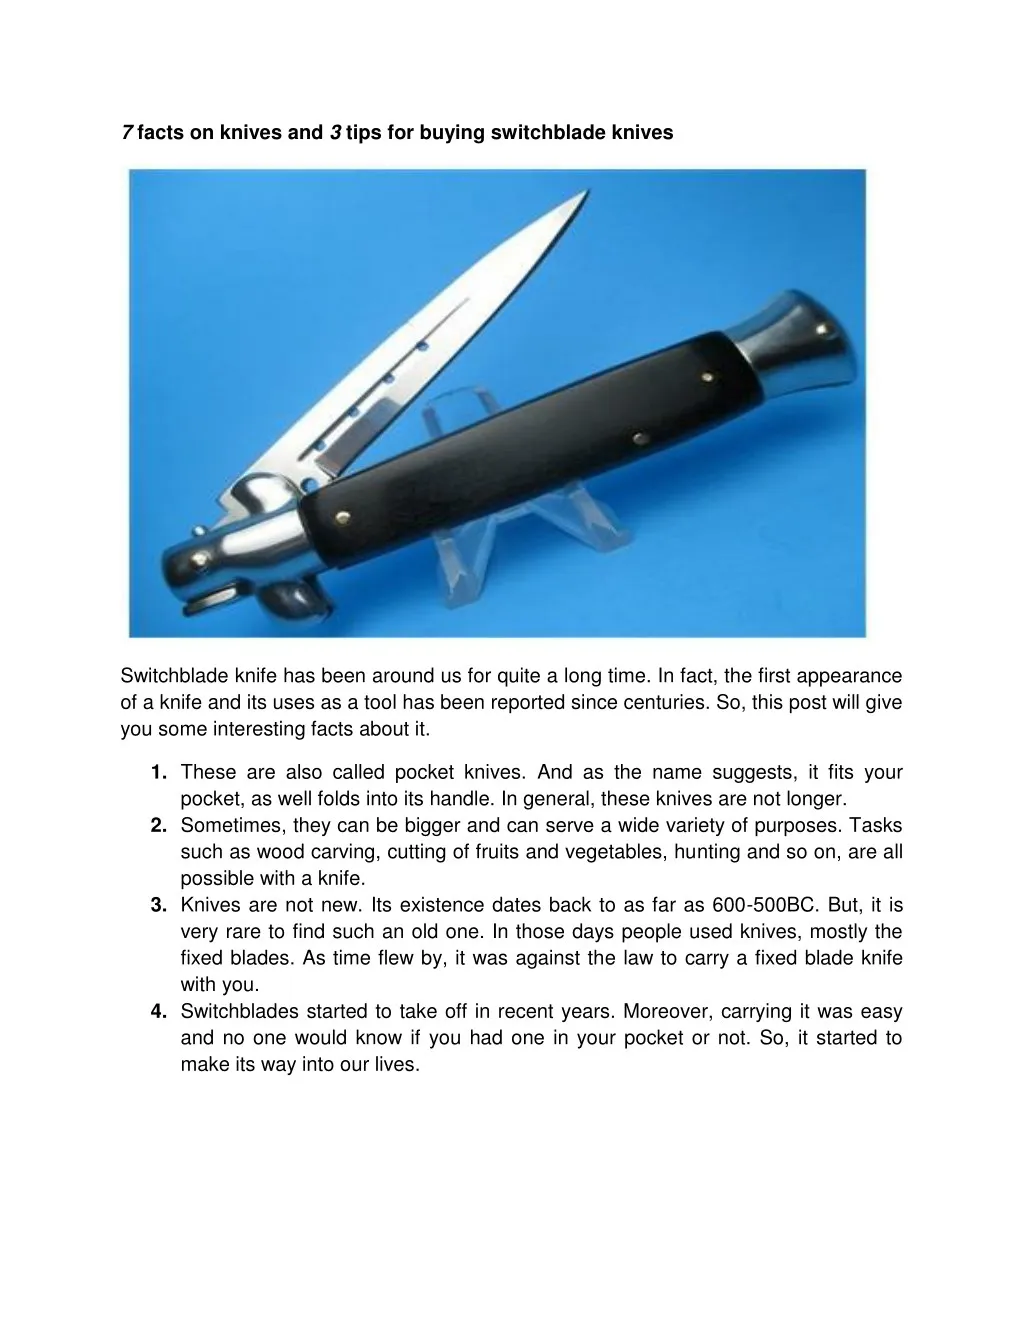 7 facts on knives and 3 tips for buying